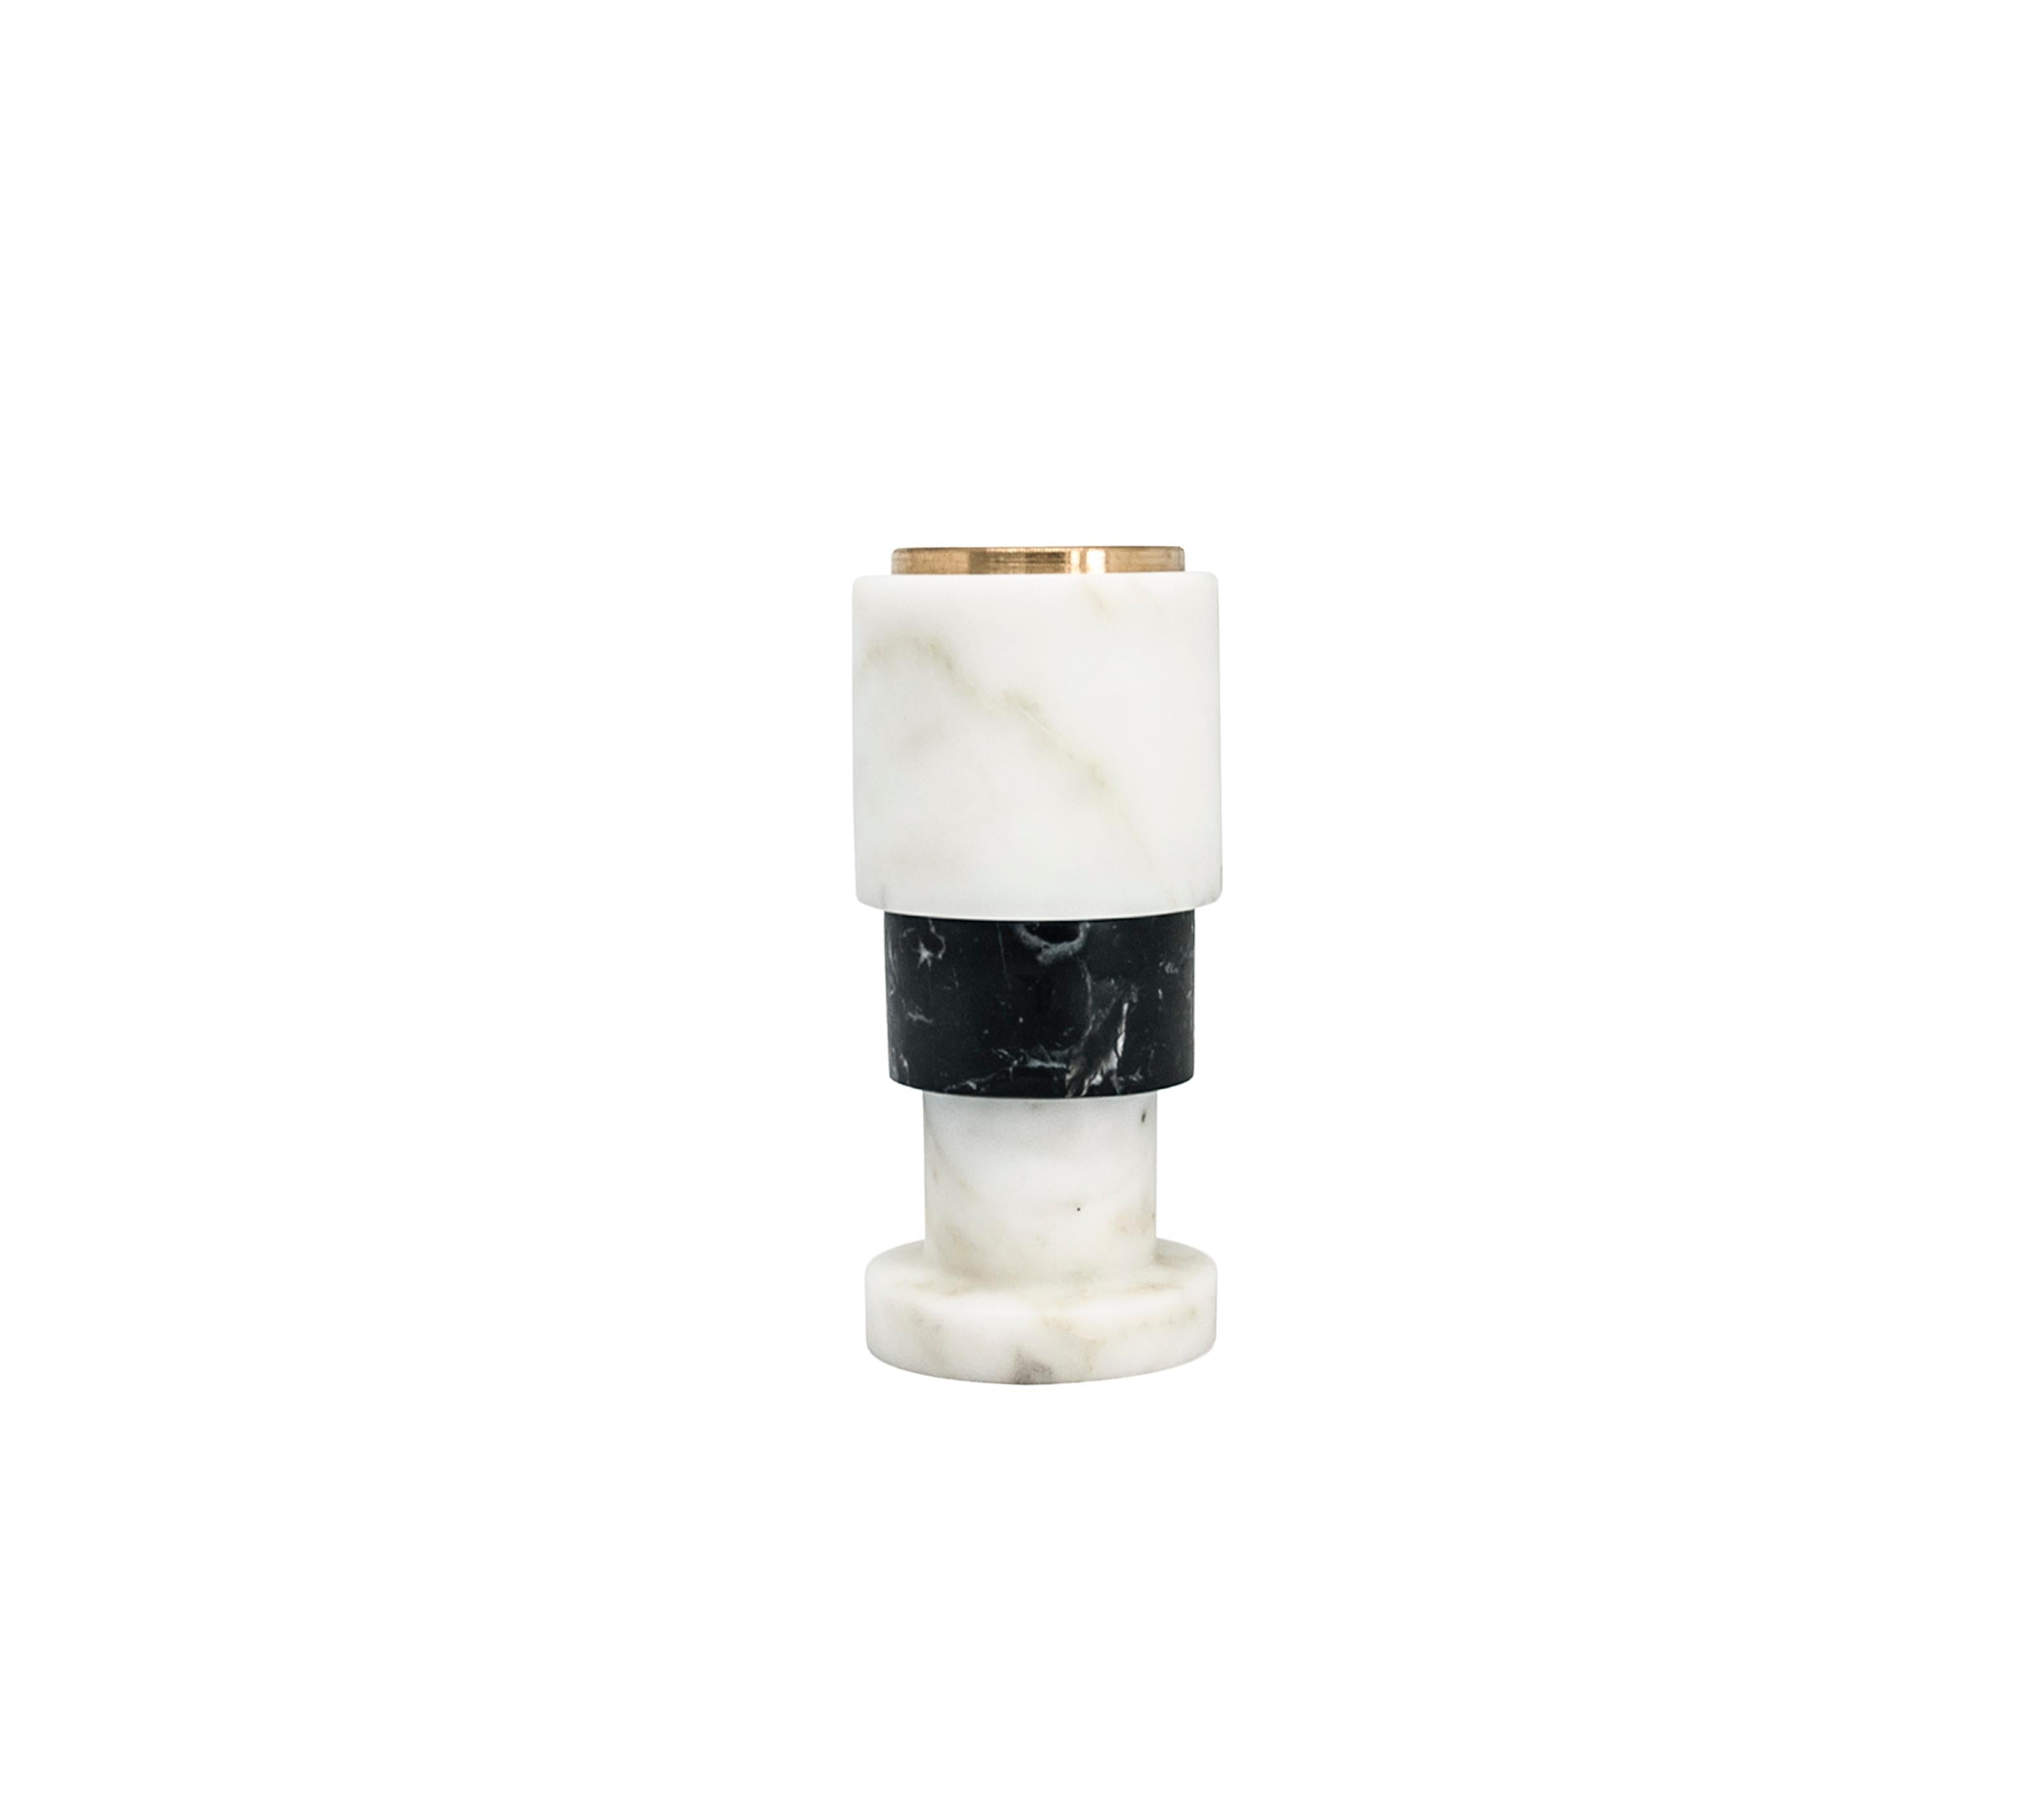 Short squared two-tone candleholder in white Carrara marble, black Marquina marble and brass.
-Jacopo Simonetti Design for FiammettaV-
Each piece is in a way unique (every marble block is different in veins and shades) and handmade by Italian